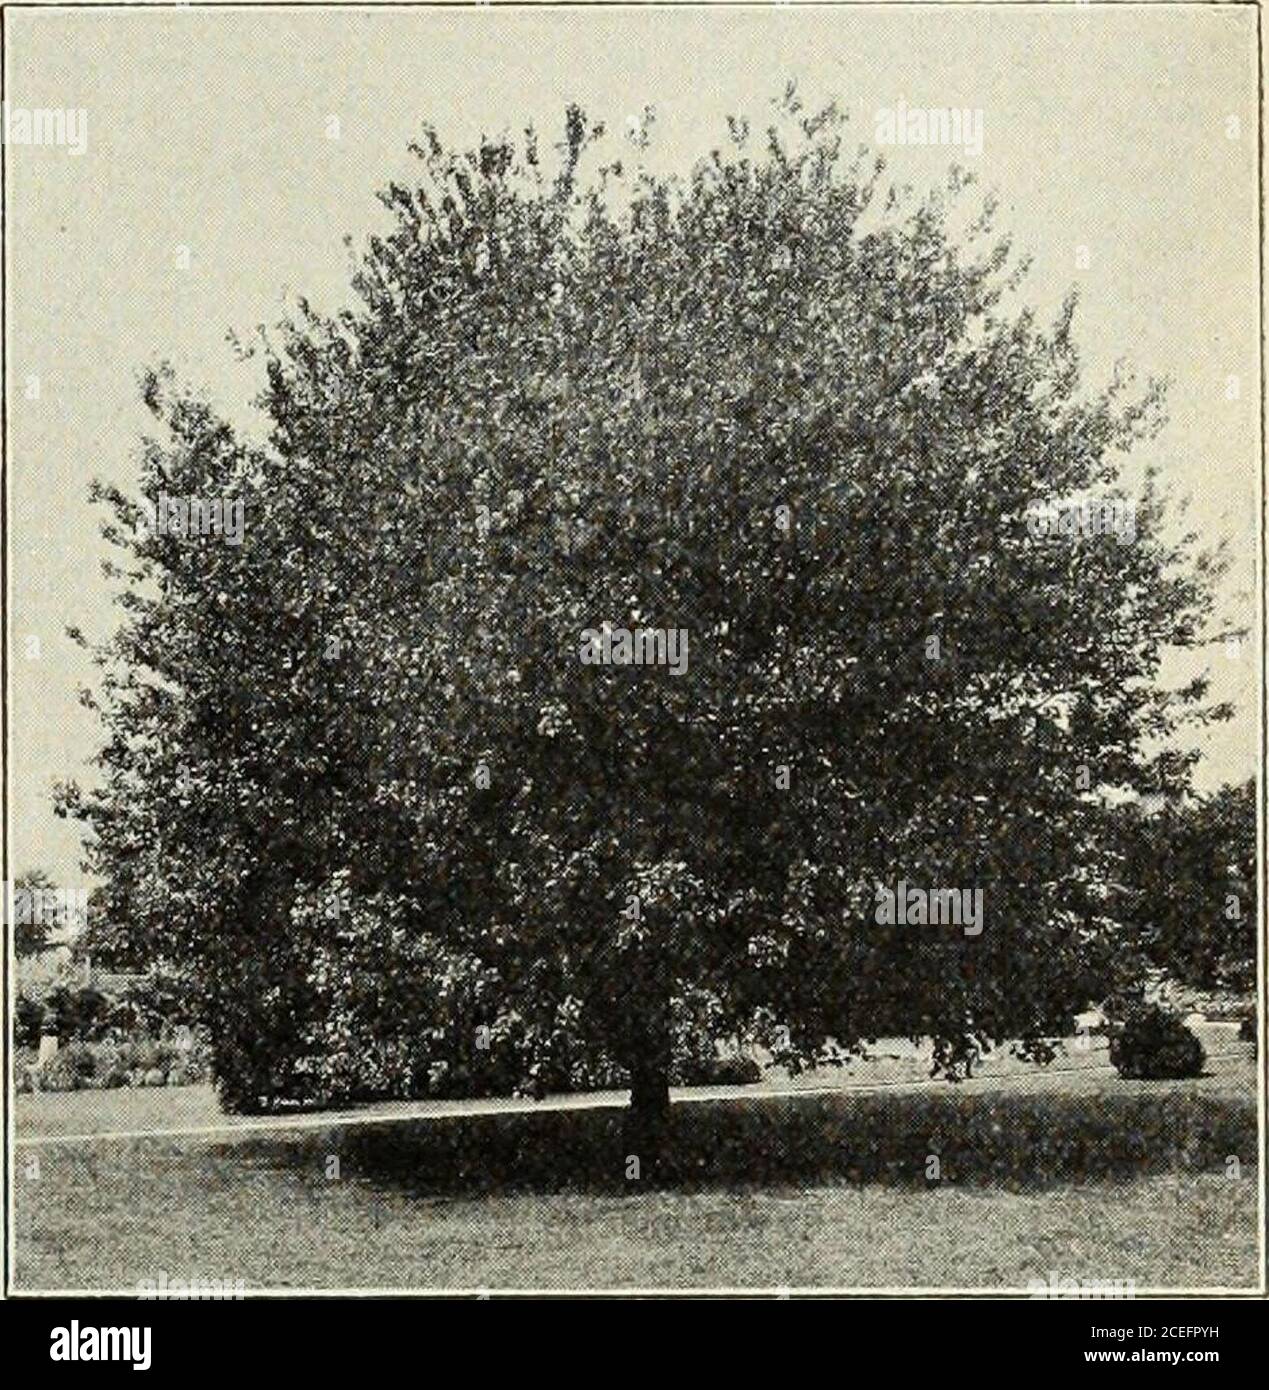 . Revised, illustrated and descriptive catalogue of fruit and ornamental trees shrubs, roses, bulbs and bulbous plants, grape vines, small fruits, etc.. Cut Leaf Japanese Maple growth ami foliage render it worthy, in ouropinion, to be classed among the finest of ourornamental trees. MAPLE—Acer. Very valuable for shade. Vigorous and freefrom disease. Hardy and adapted to all soils.Recommended for street planting. Ash-leaved, or Box Elder (Negundo)—A na-tive tree, maple-like in its seeds and ash-likein foliage; of irregular spreading habit. Japan Blood-leaved.—Of dwarf habit androunded form; fol Stock Photo